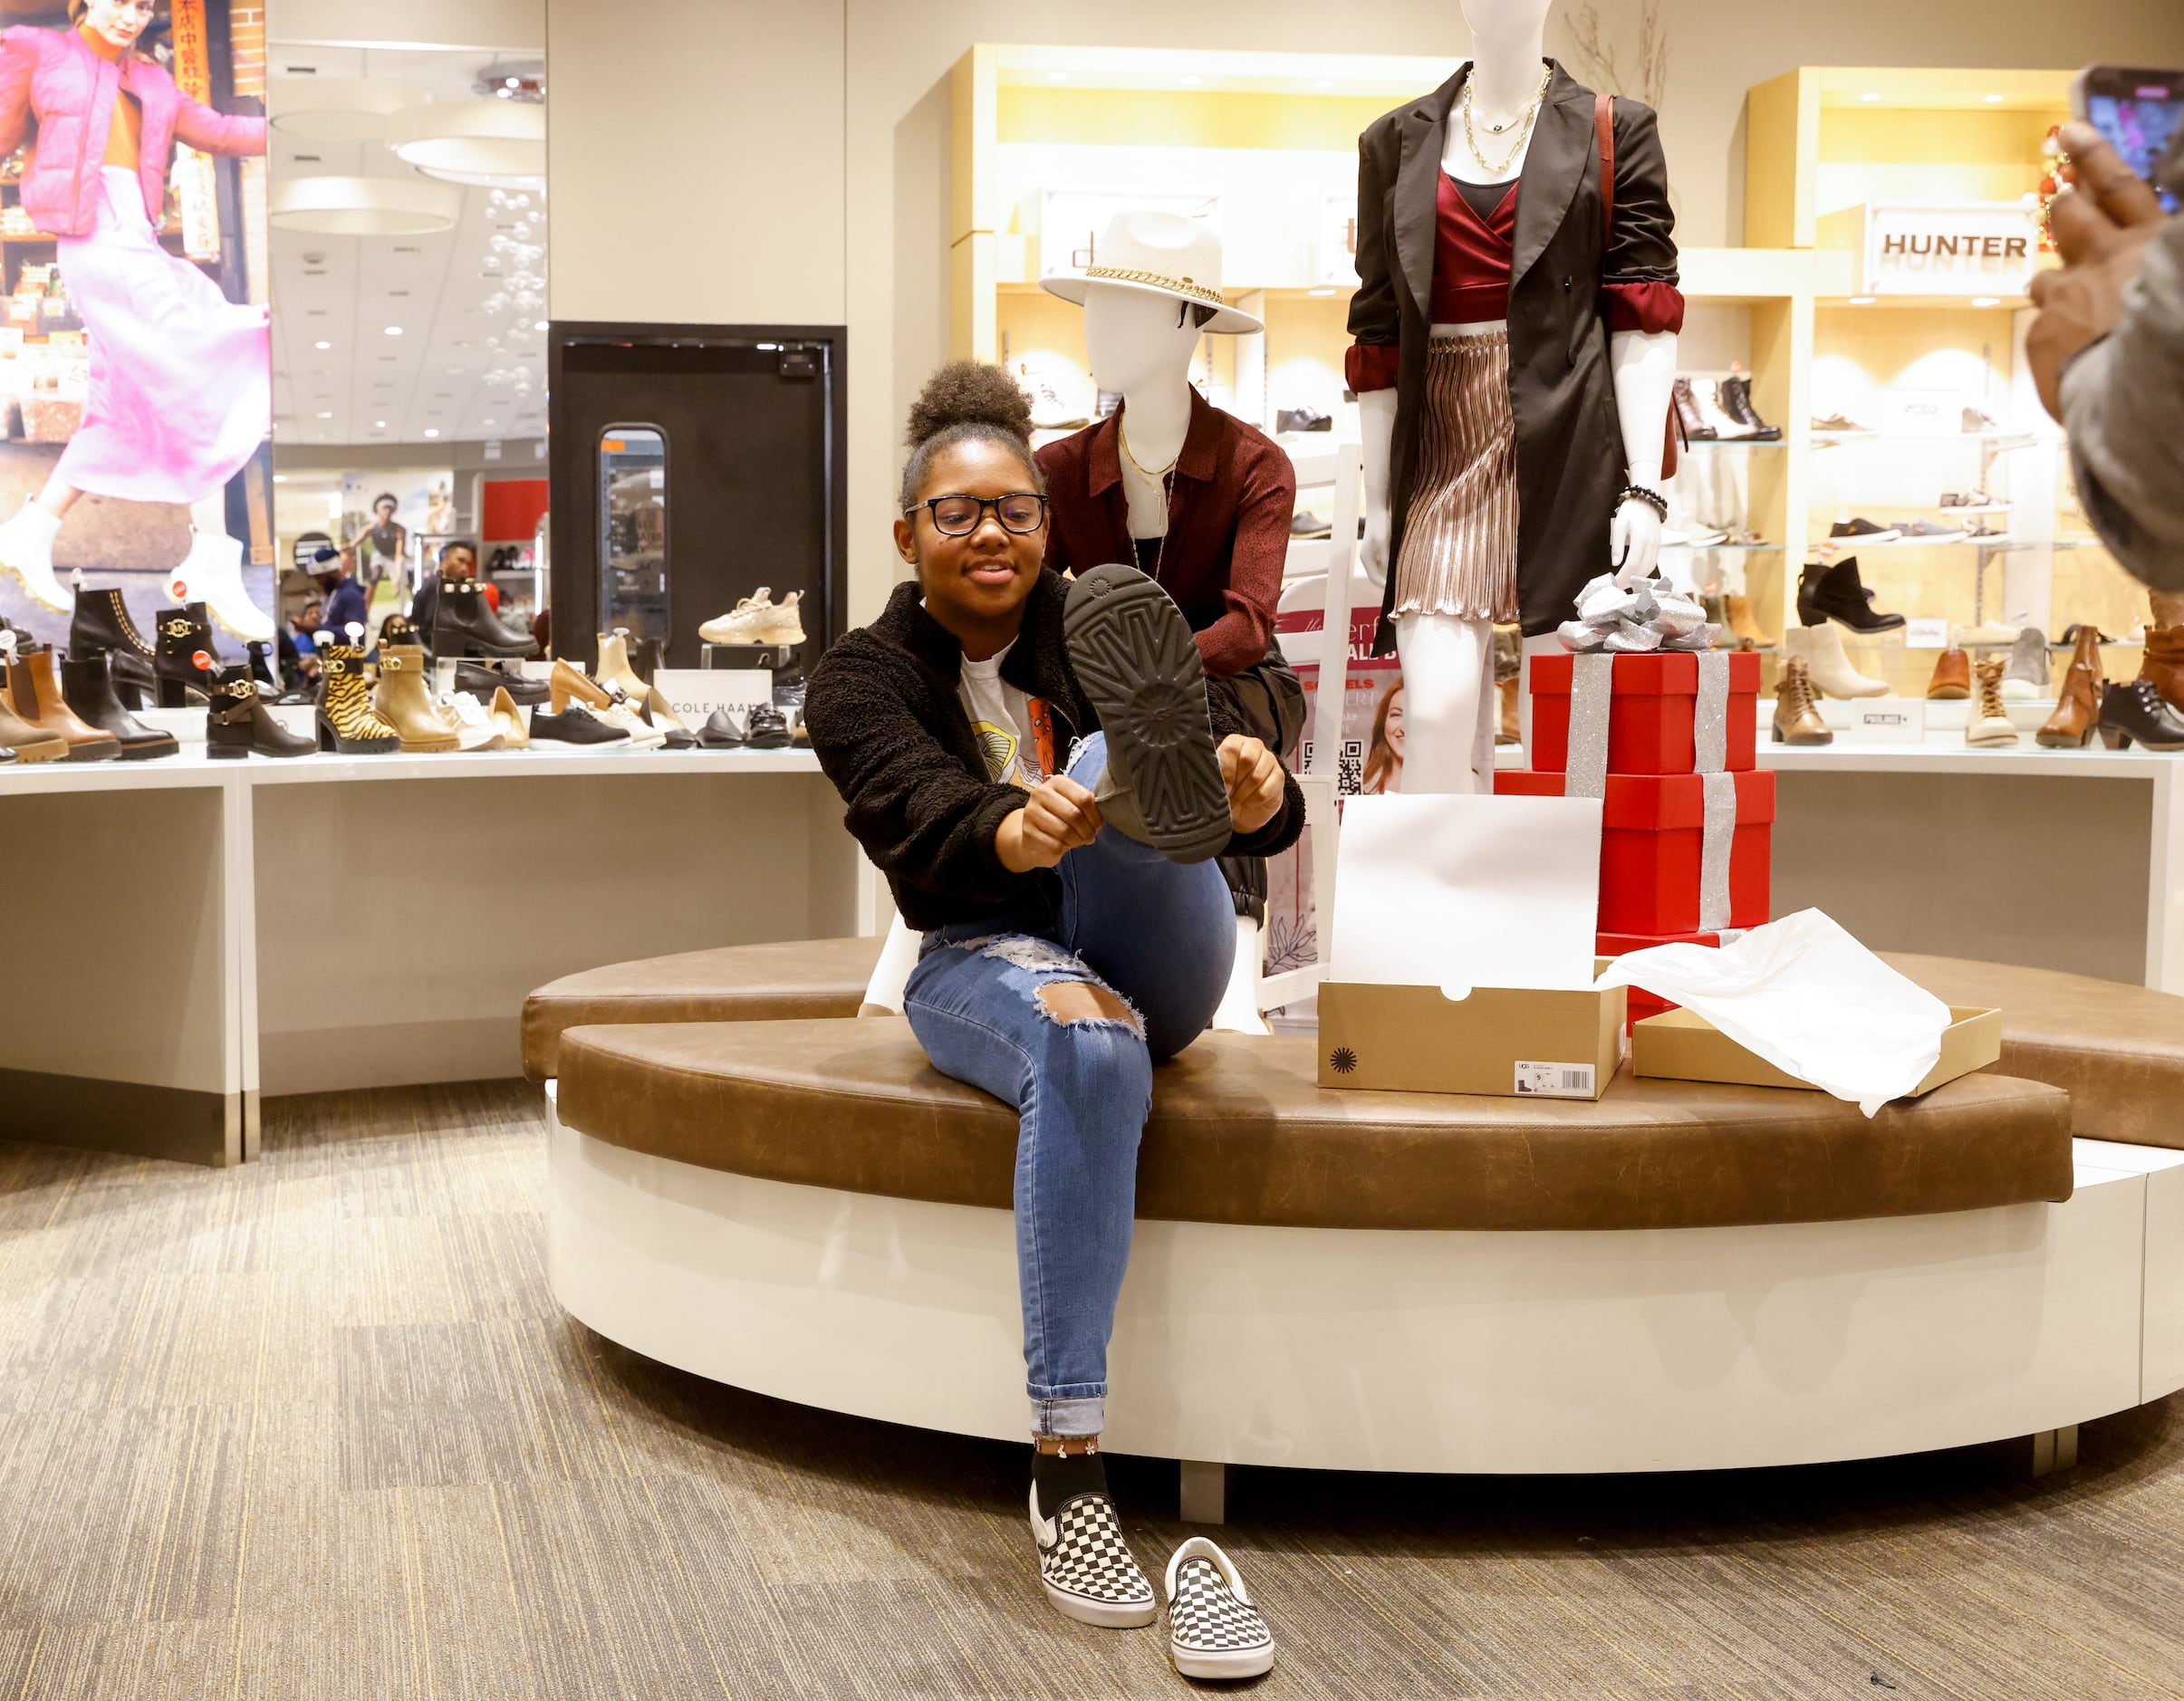 Brooklyn Gilyard, 16, tries on a pair of Ugg boots during a Dallas Mavericks shopping spree...